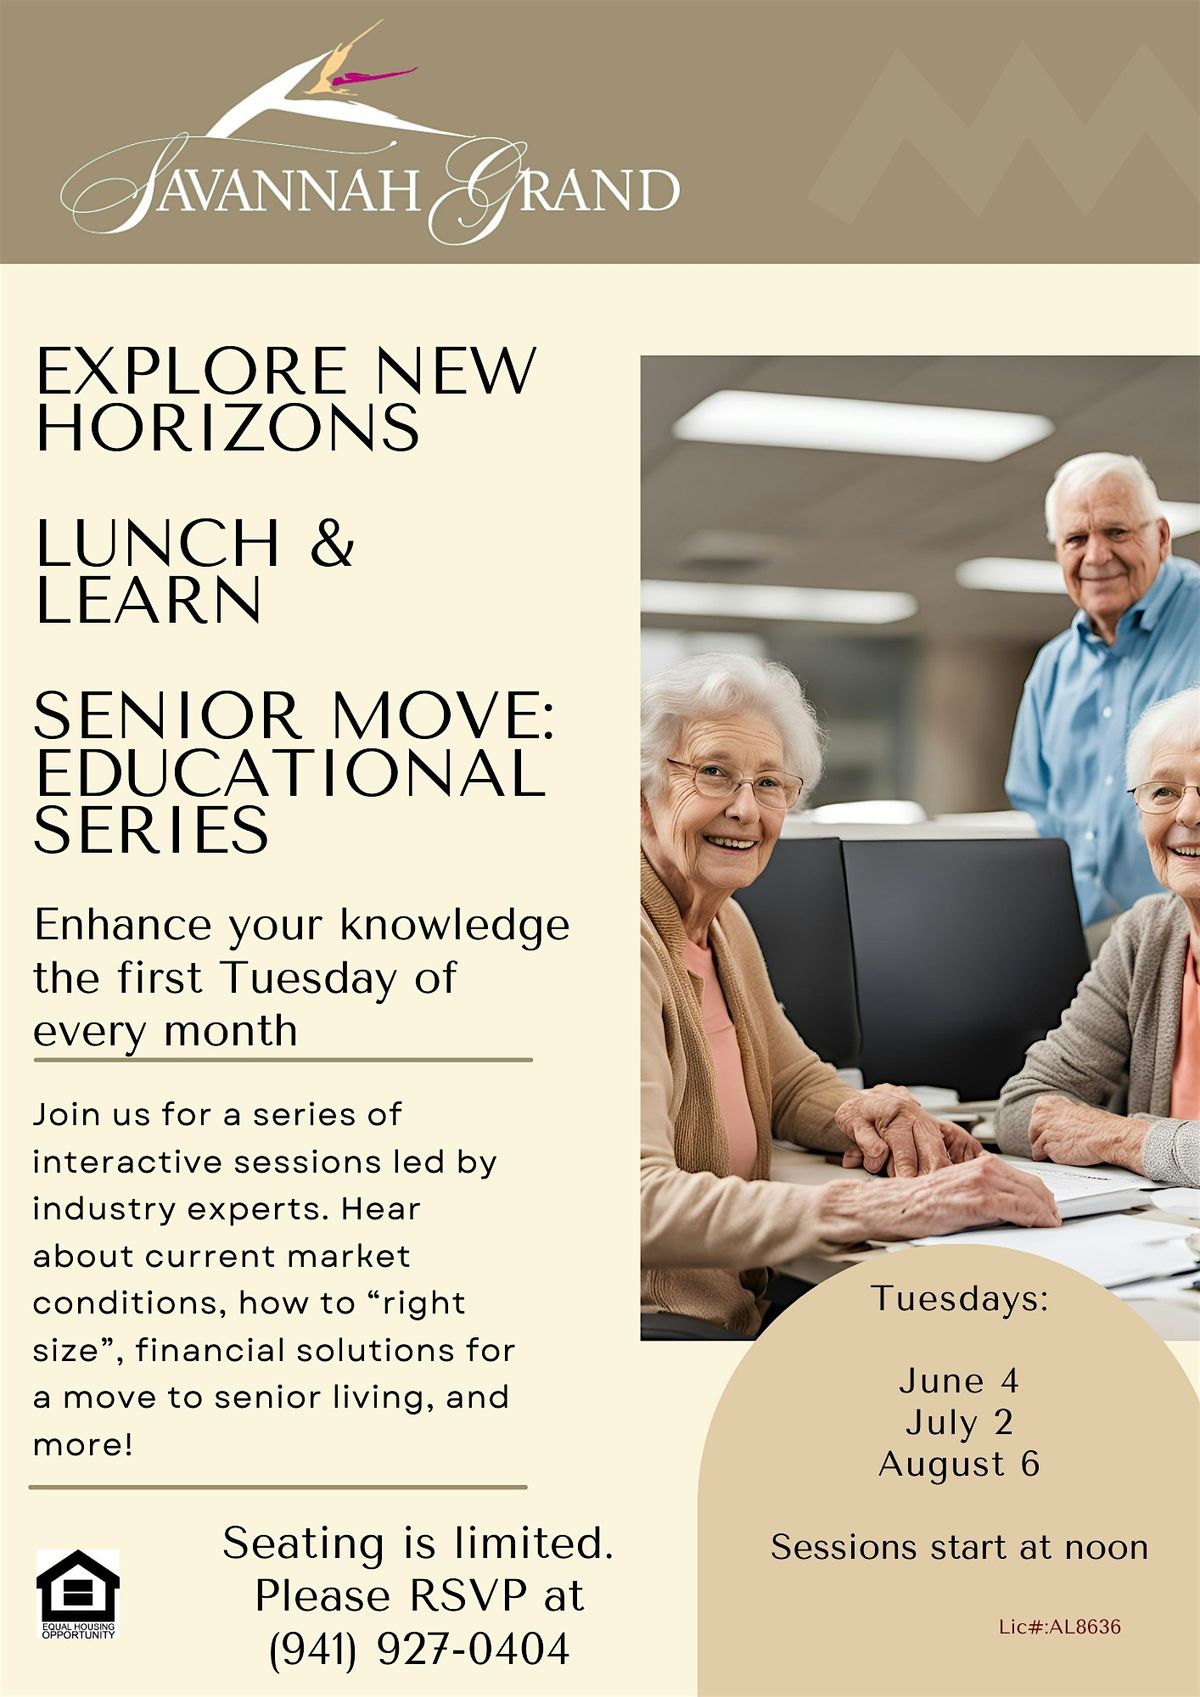 Explore New Horizons: Lunch & Learn Educational Series